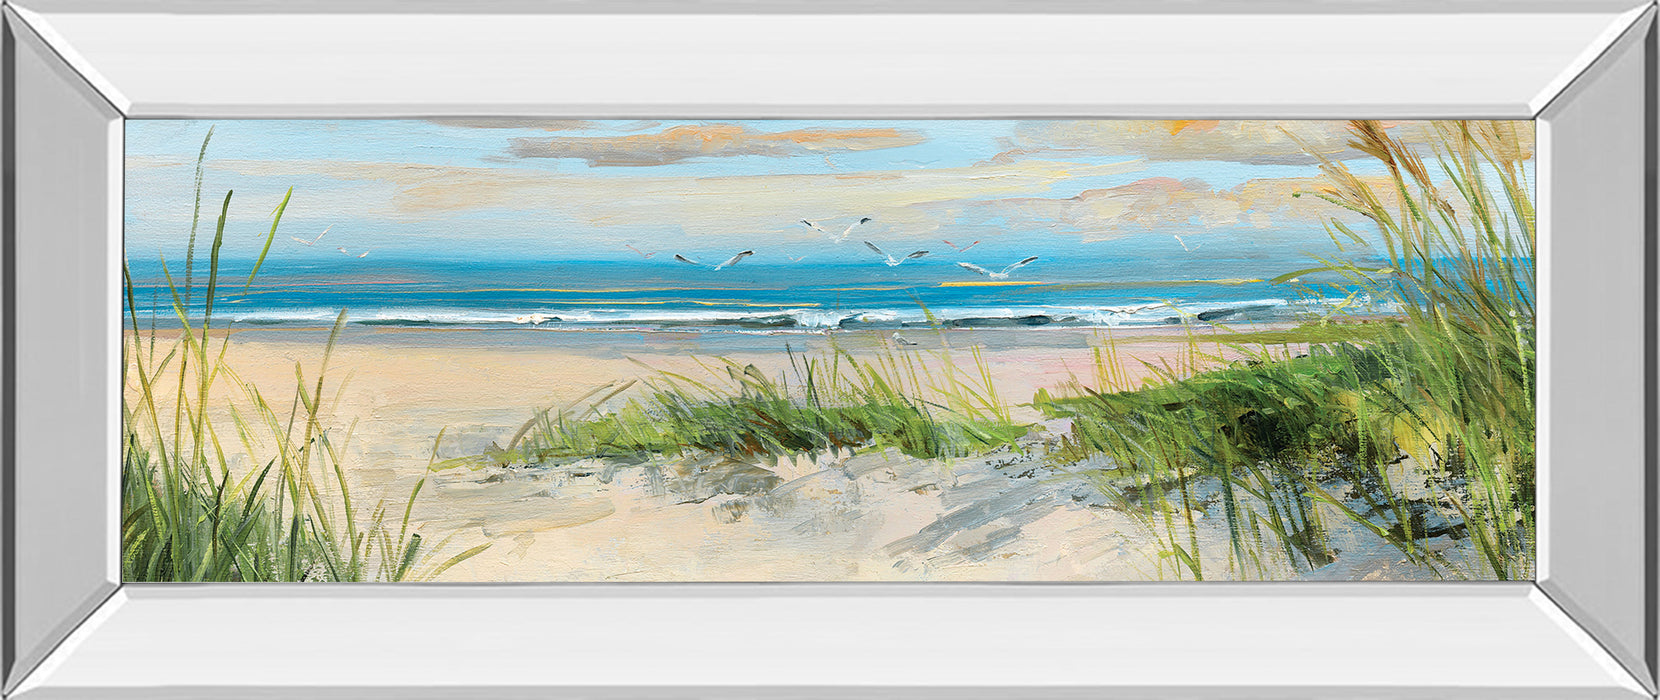 Catching The Wind Il By Sally Swatland - Mirror Framed Print Wall Art - Blue